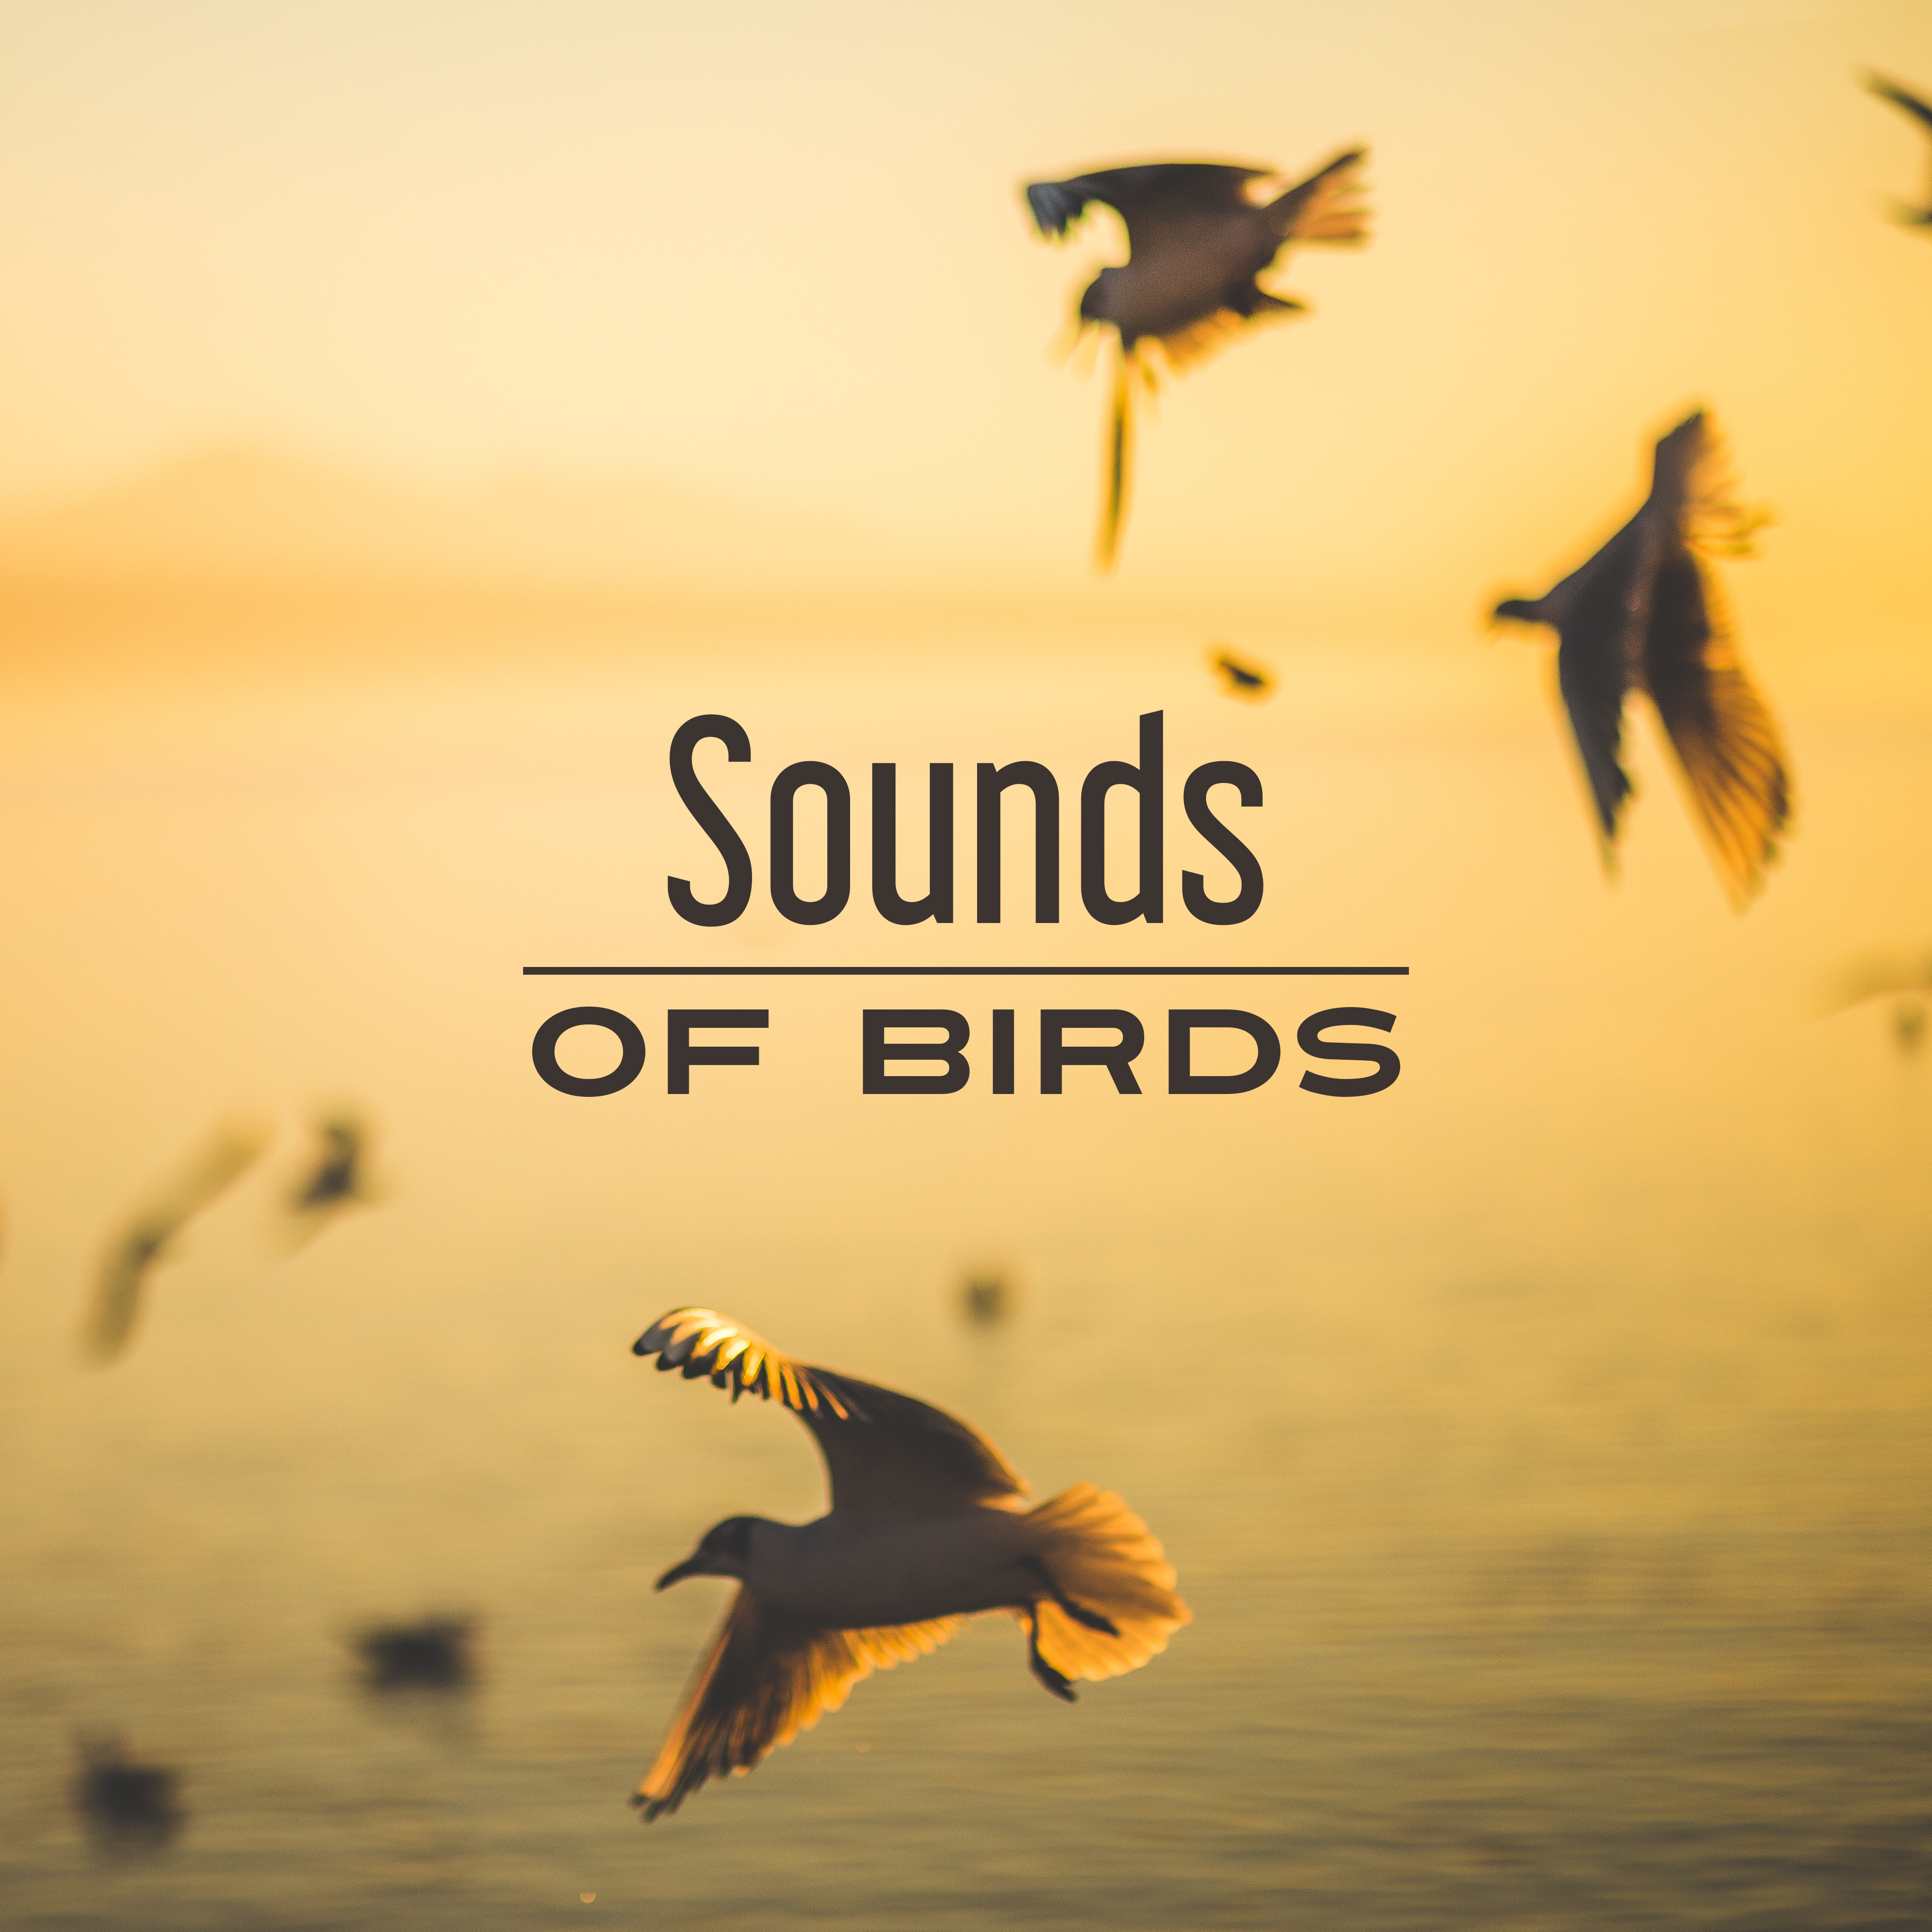 Sounds of Birds – Relaxing Therapy for Mind, Deep Sleep, Peaceful Music, Rest, Calmness, Relaxation, Harmony, Nature Sounds